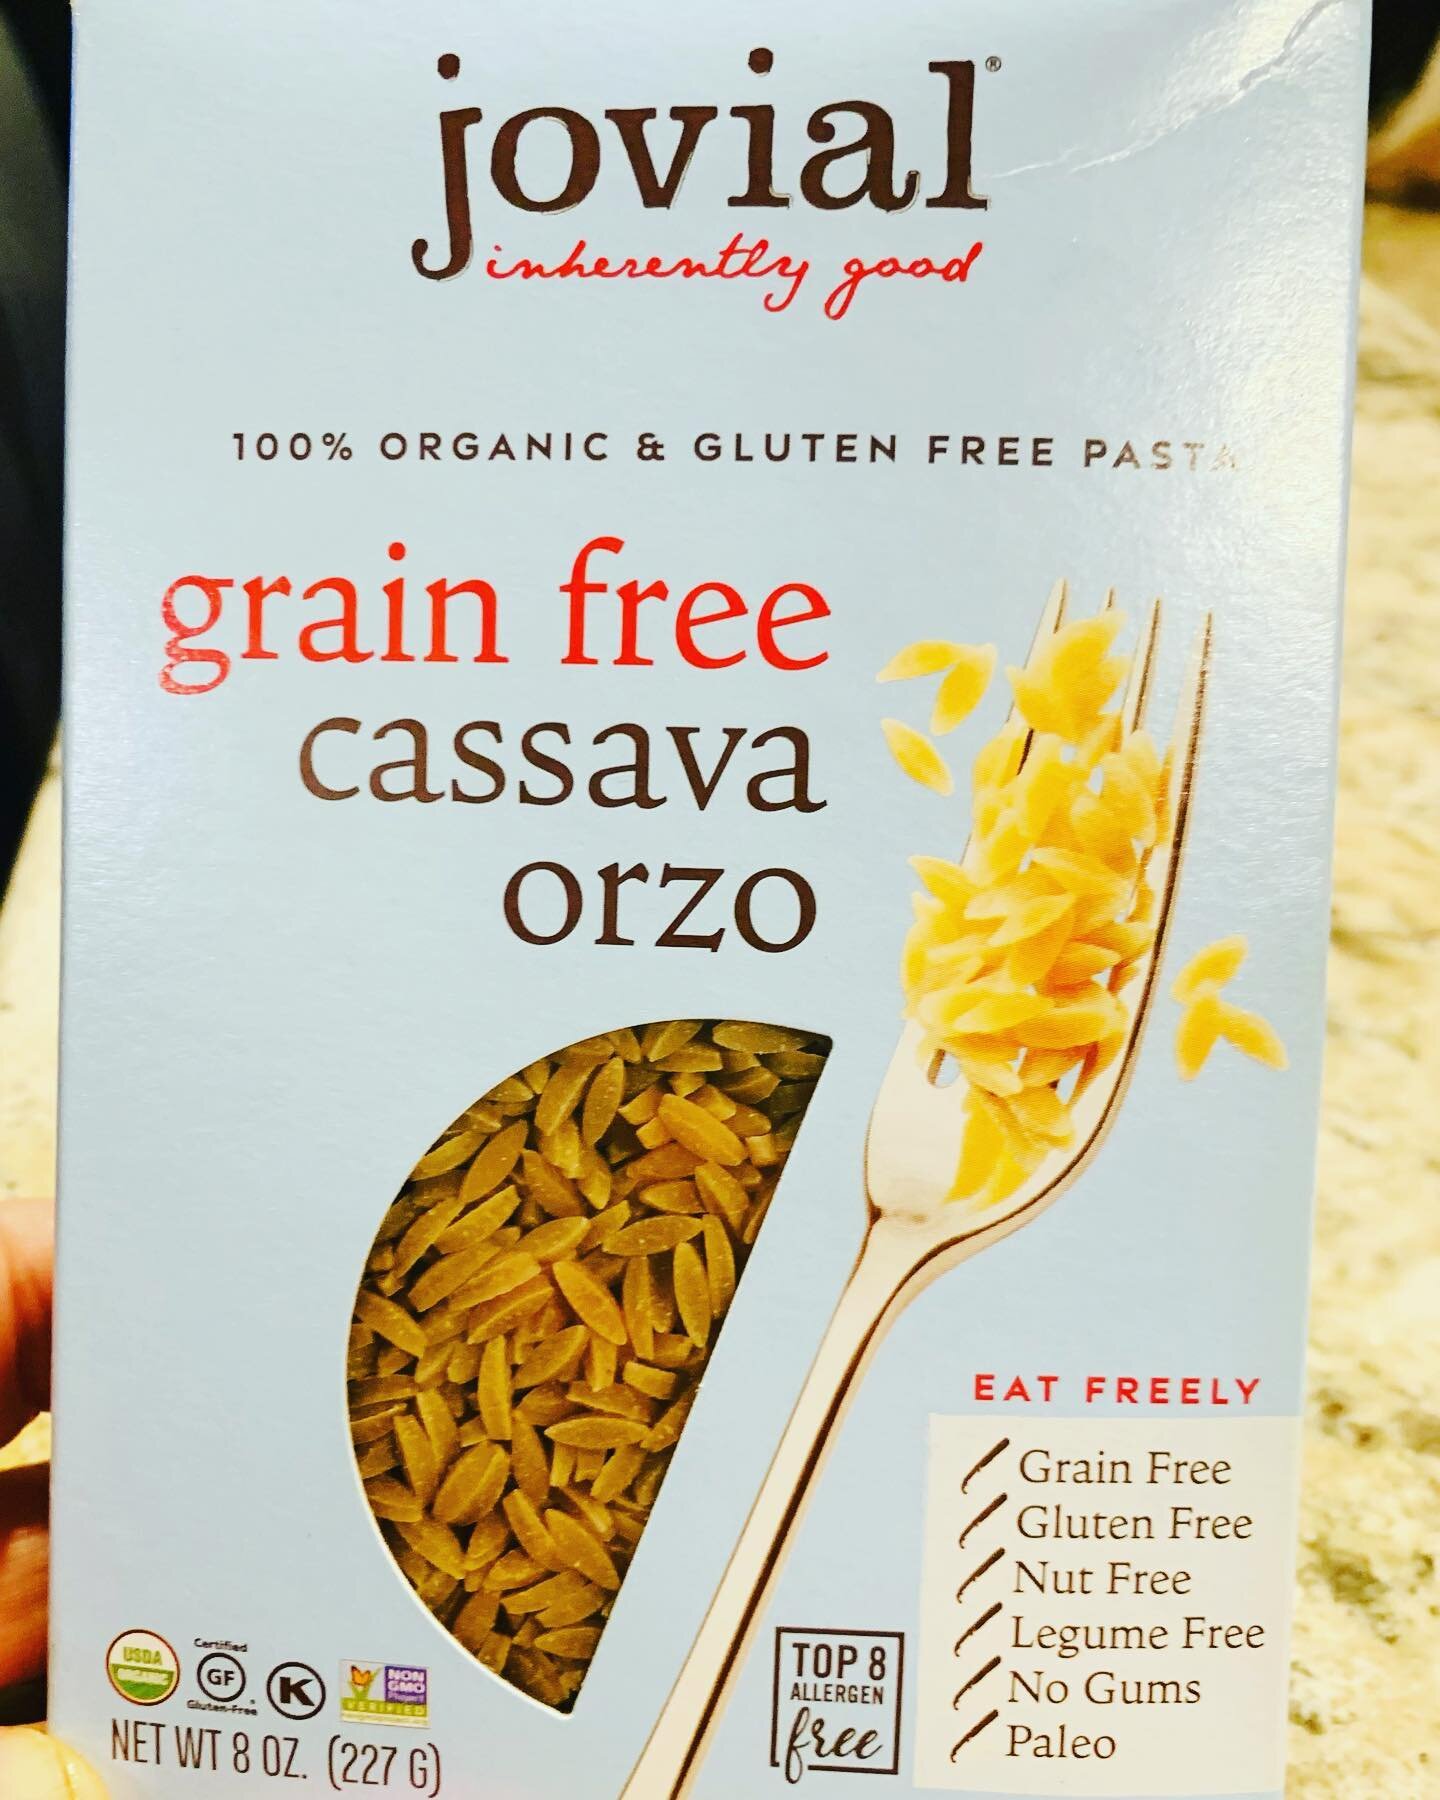 I&rsquo;m always on the lookout for new gluten free products.  At Sprouts today, I found my first box of GF orzo!  I haven&rsquo;t tried Jovial&rsquo;s cassava pasta yet, but Jovial is hands down the best gluten free pasta. Of course, it&rsquo;s goin